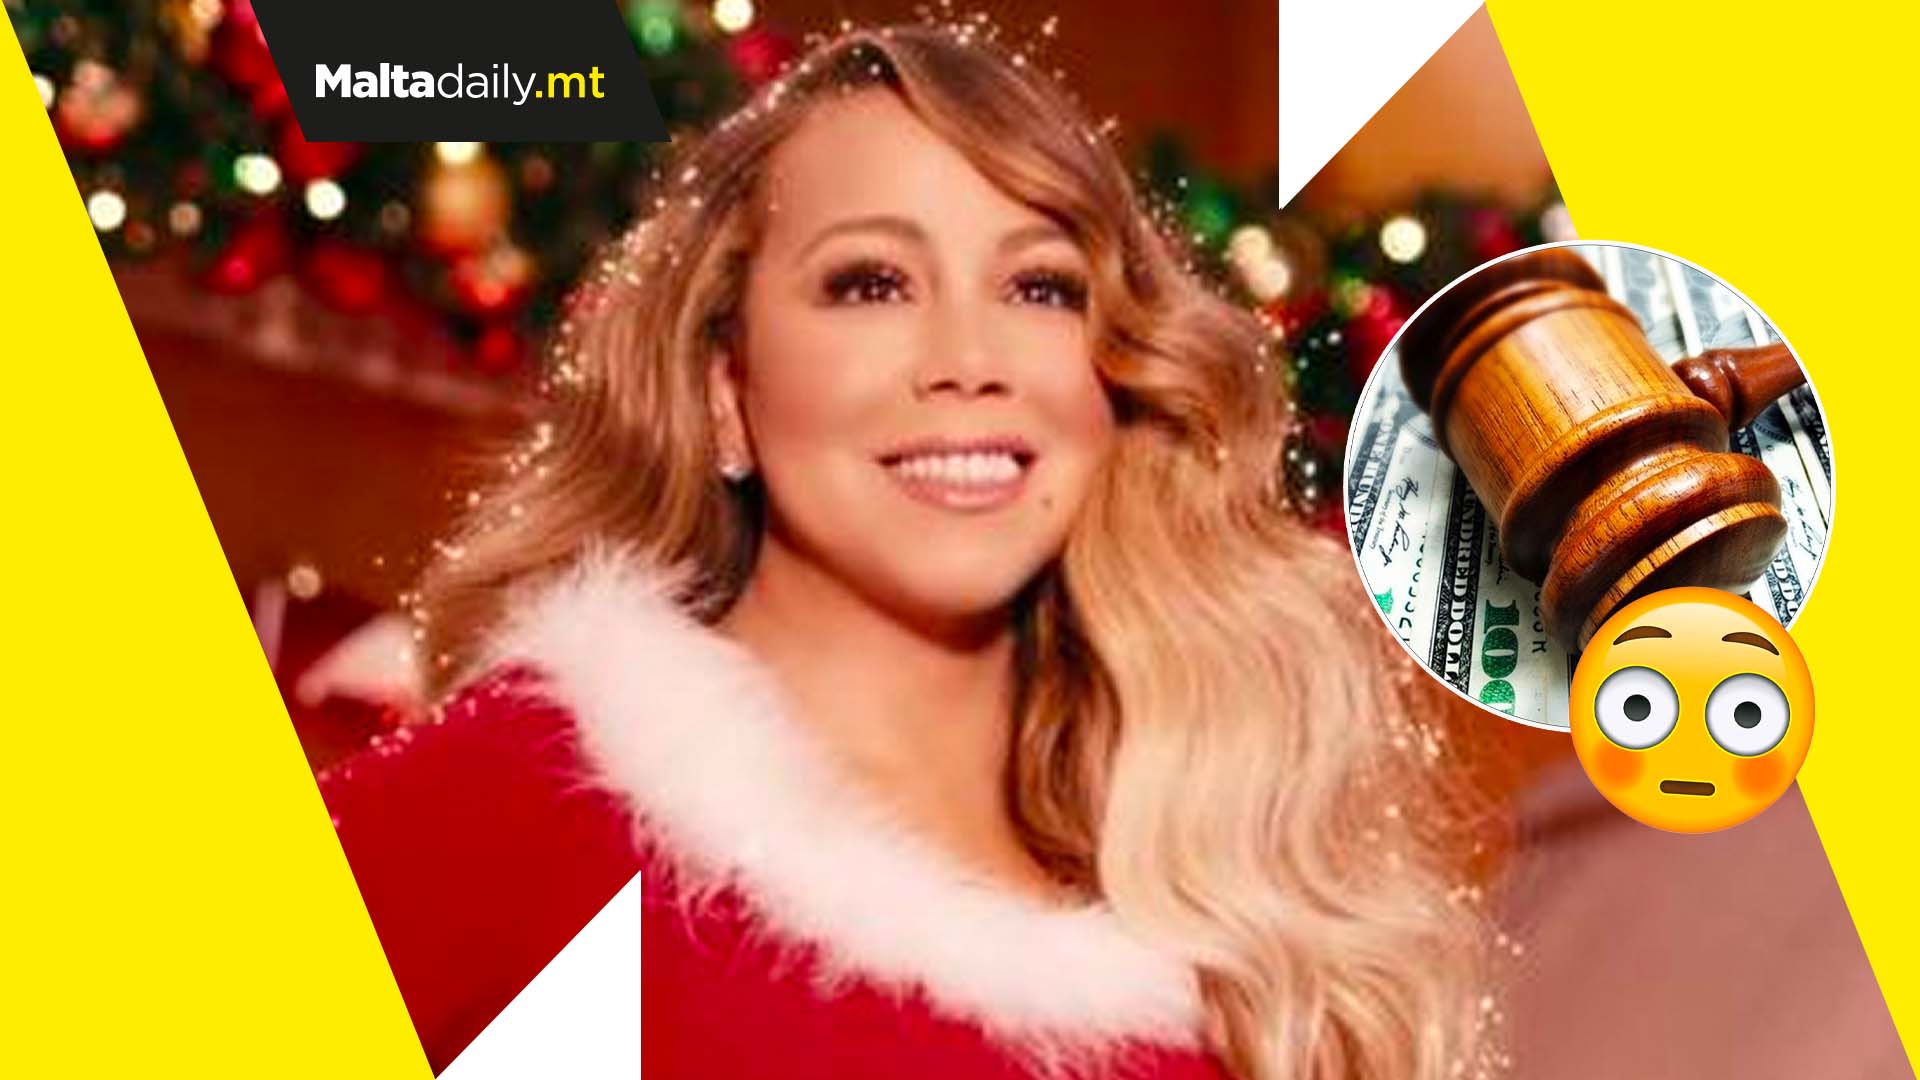 Mariah Carey gets $20 million lawsuit over ‘All I Want for Christmas is You’